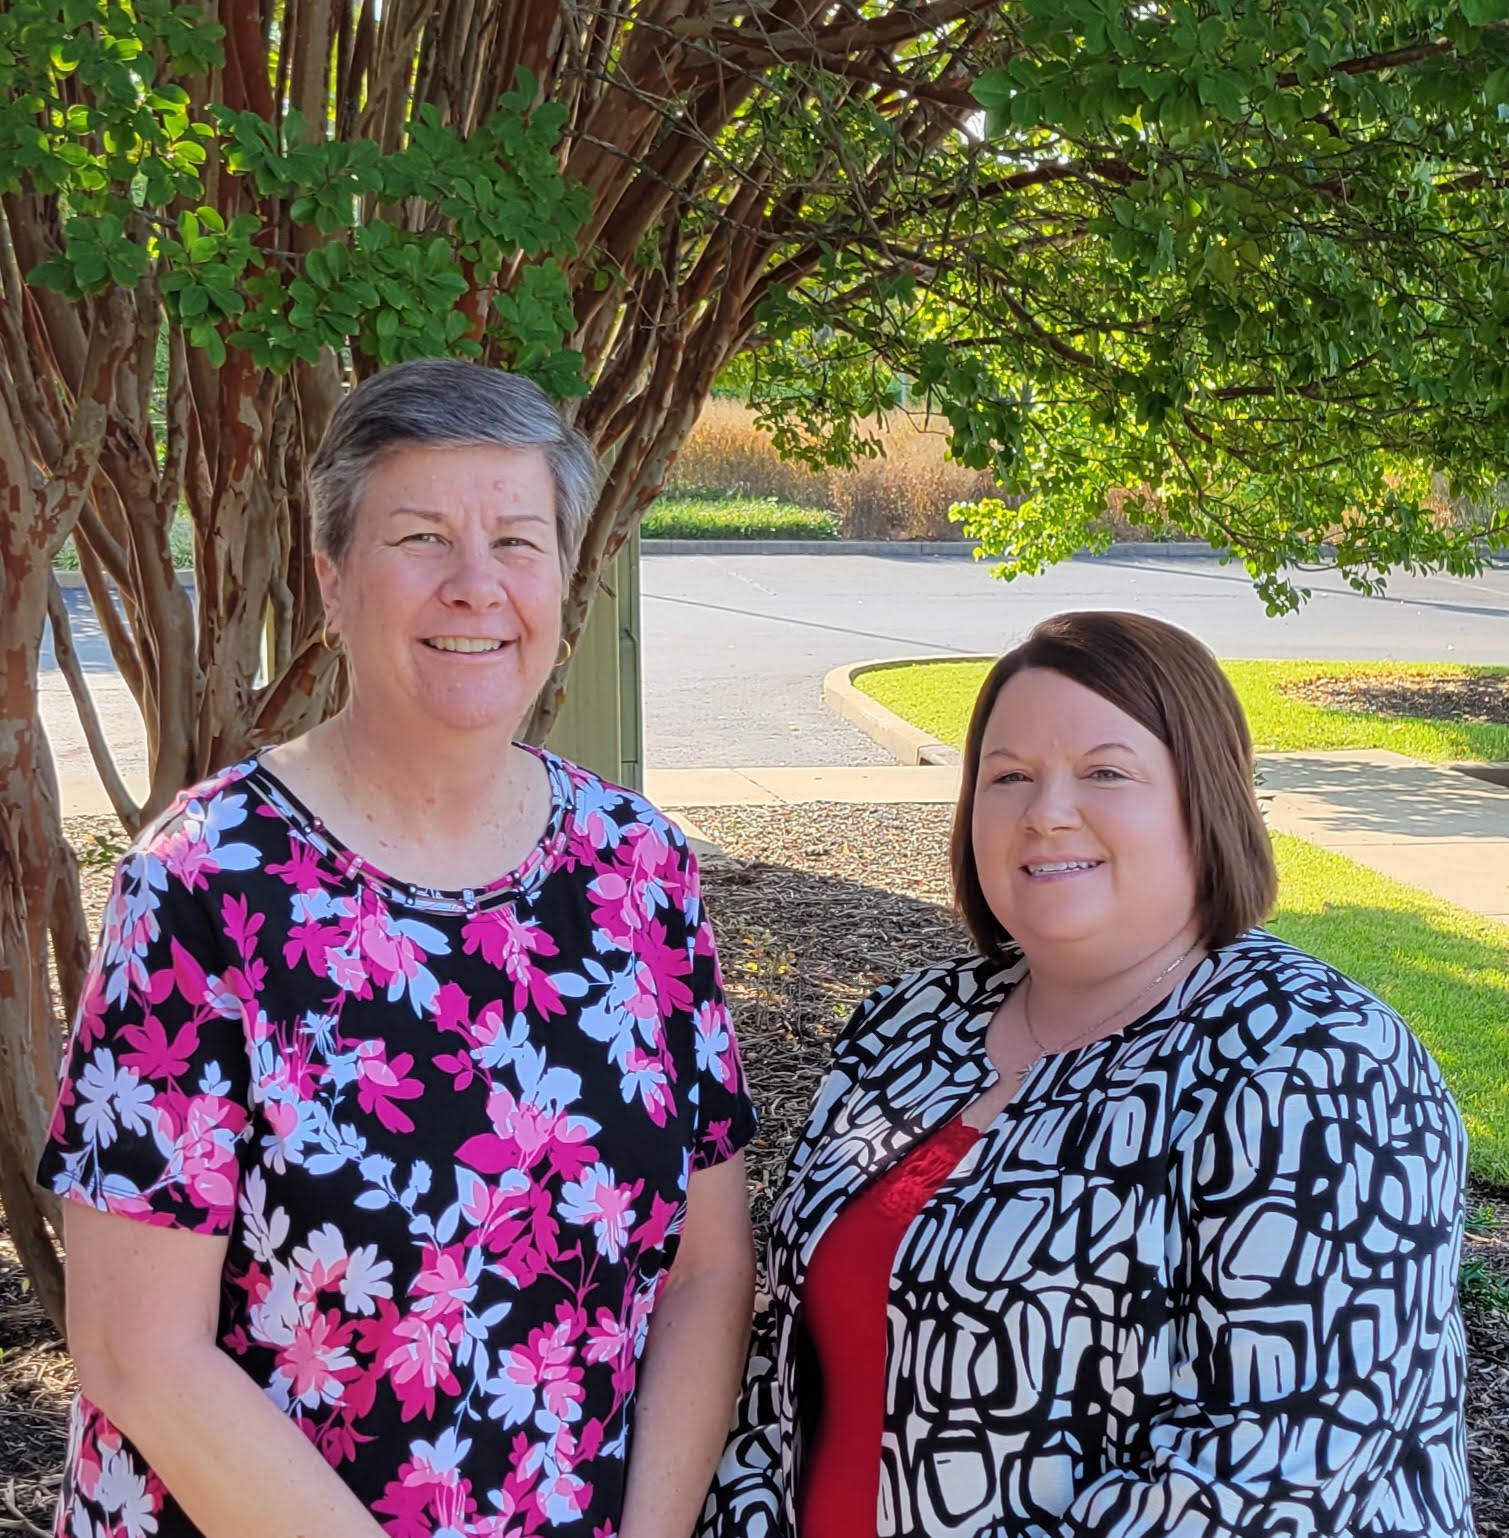 Jane Oberhellmann, left, retires as the CEO of Nashville Post Office Credit Union. Cristy Skinner succeeds her as the fourth woman to lead the 97-year-old credit union.